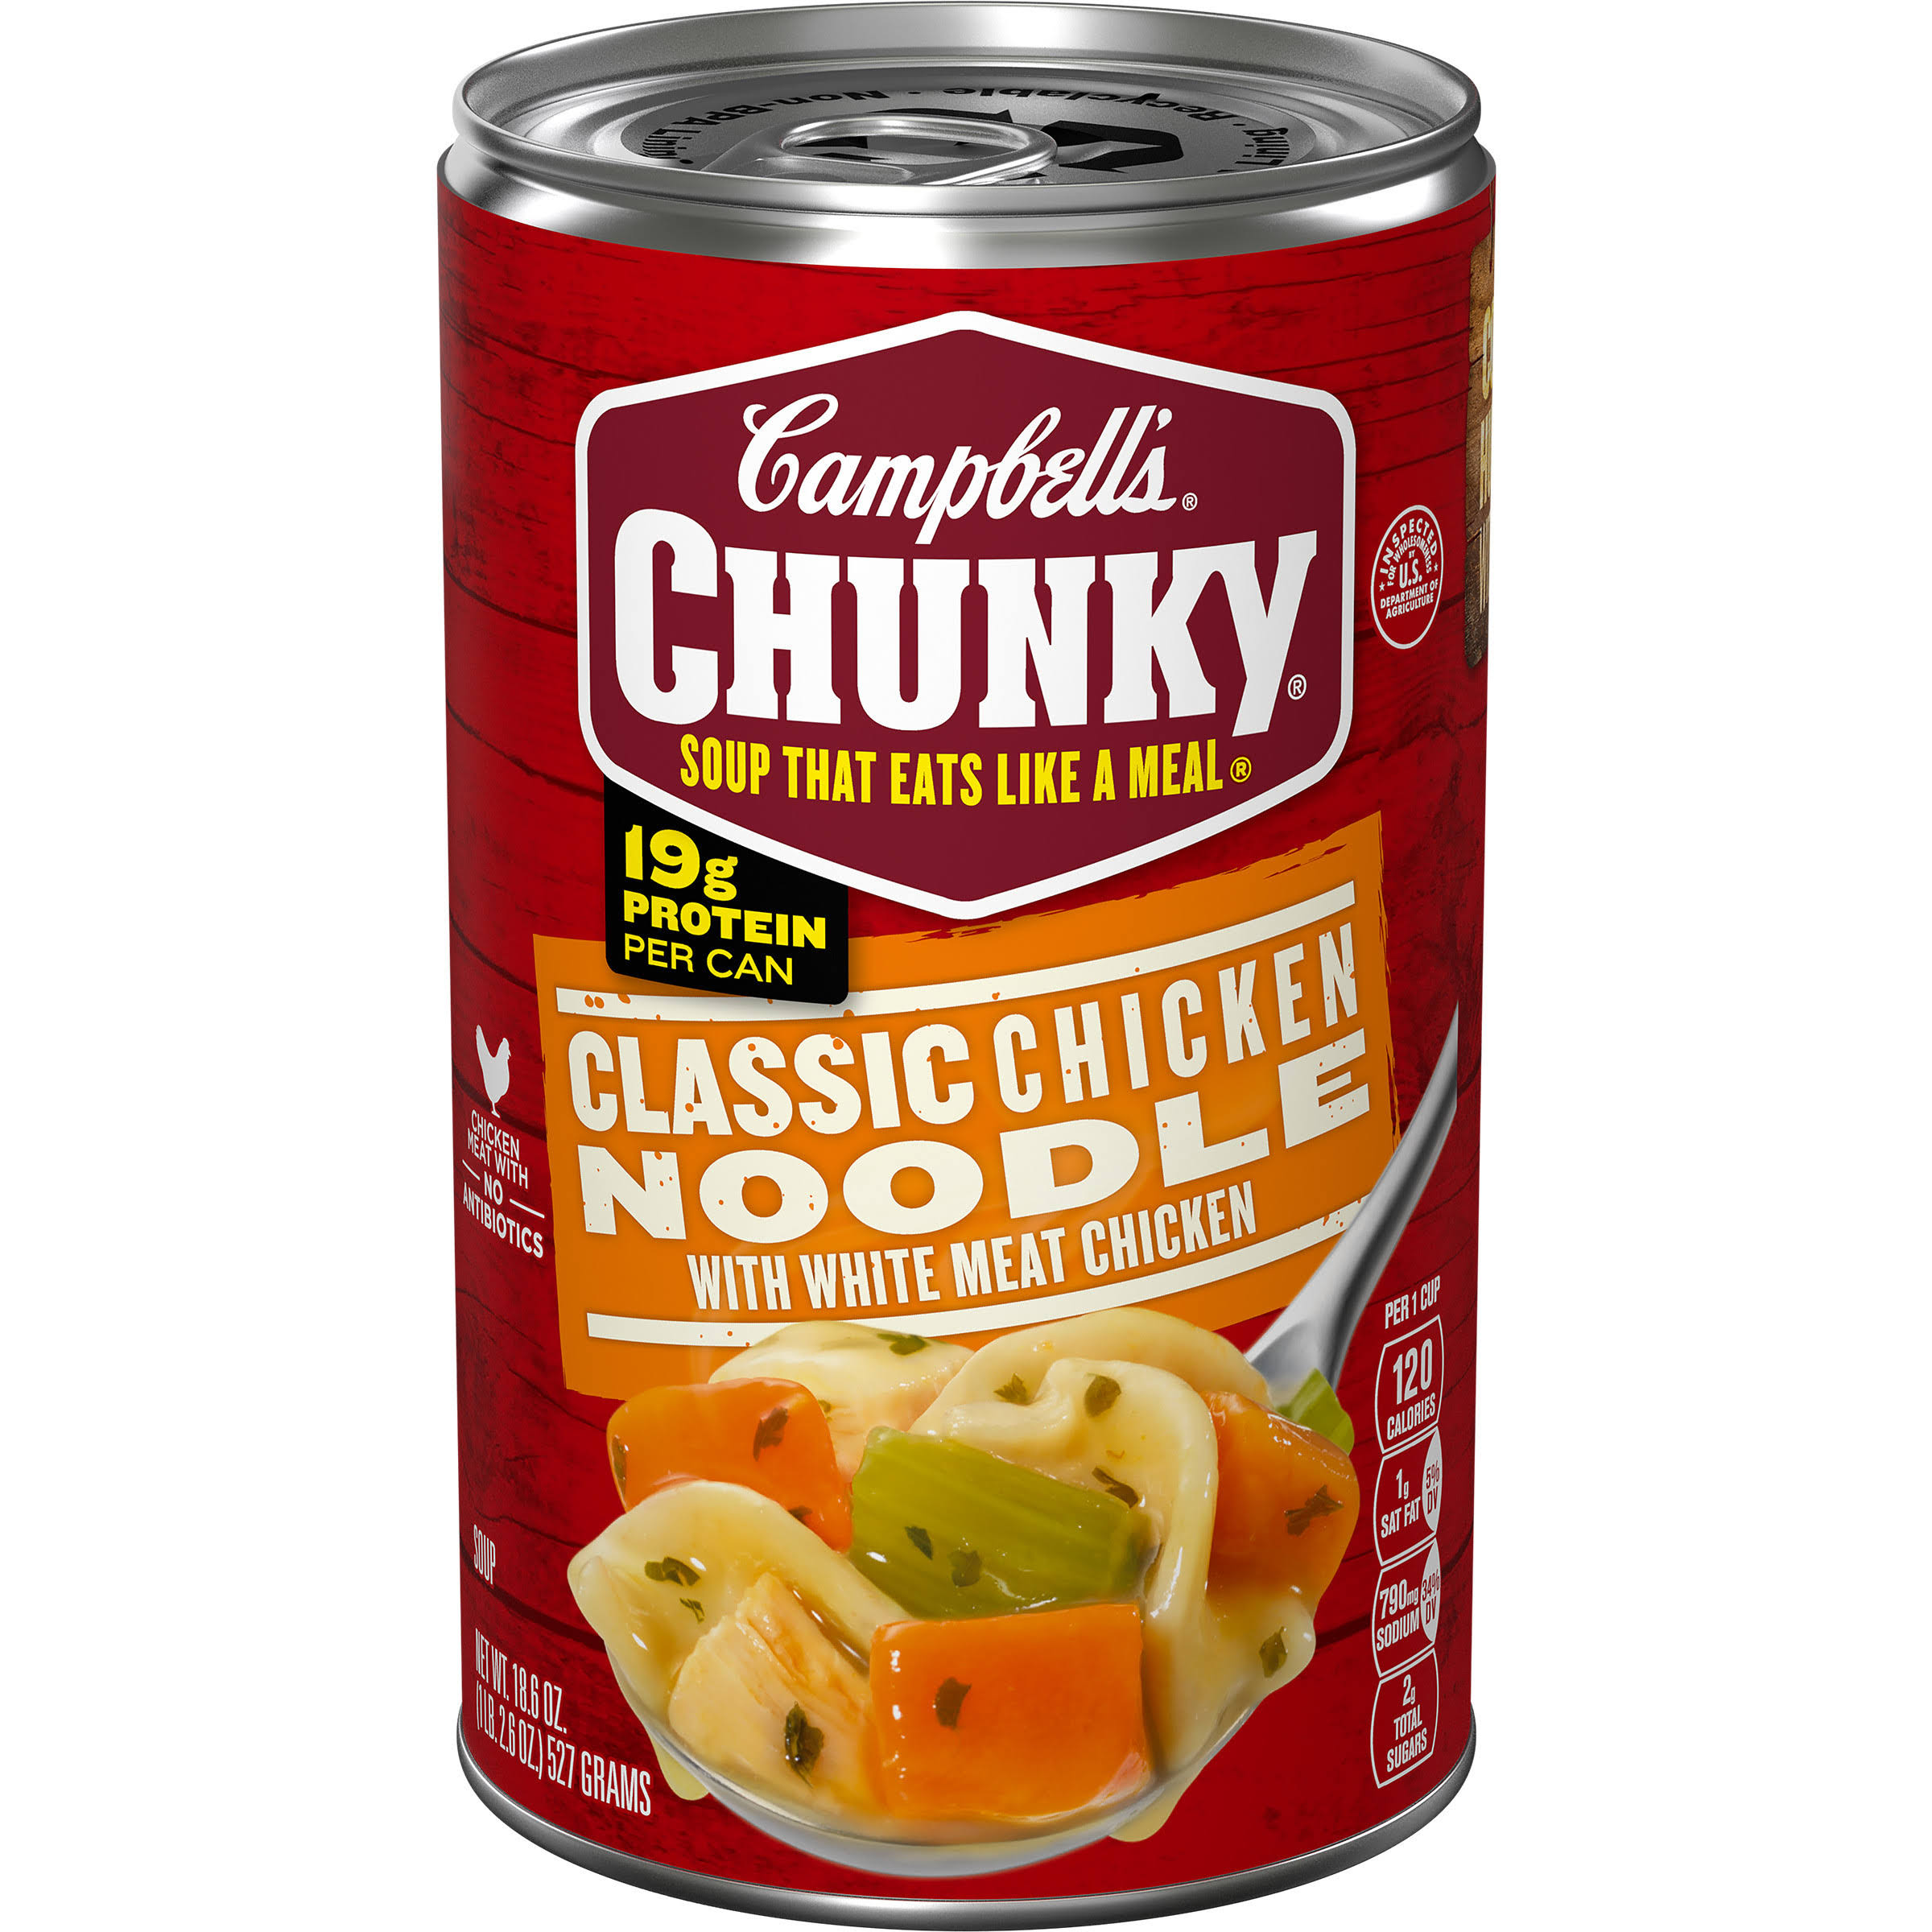 Campbells Chunky Classic Chicken Noodle Soup - 19oz